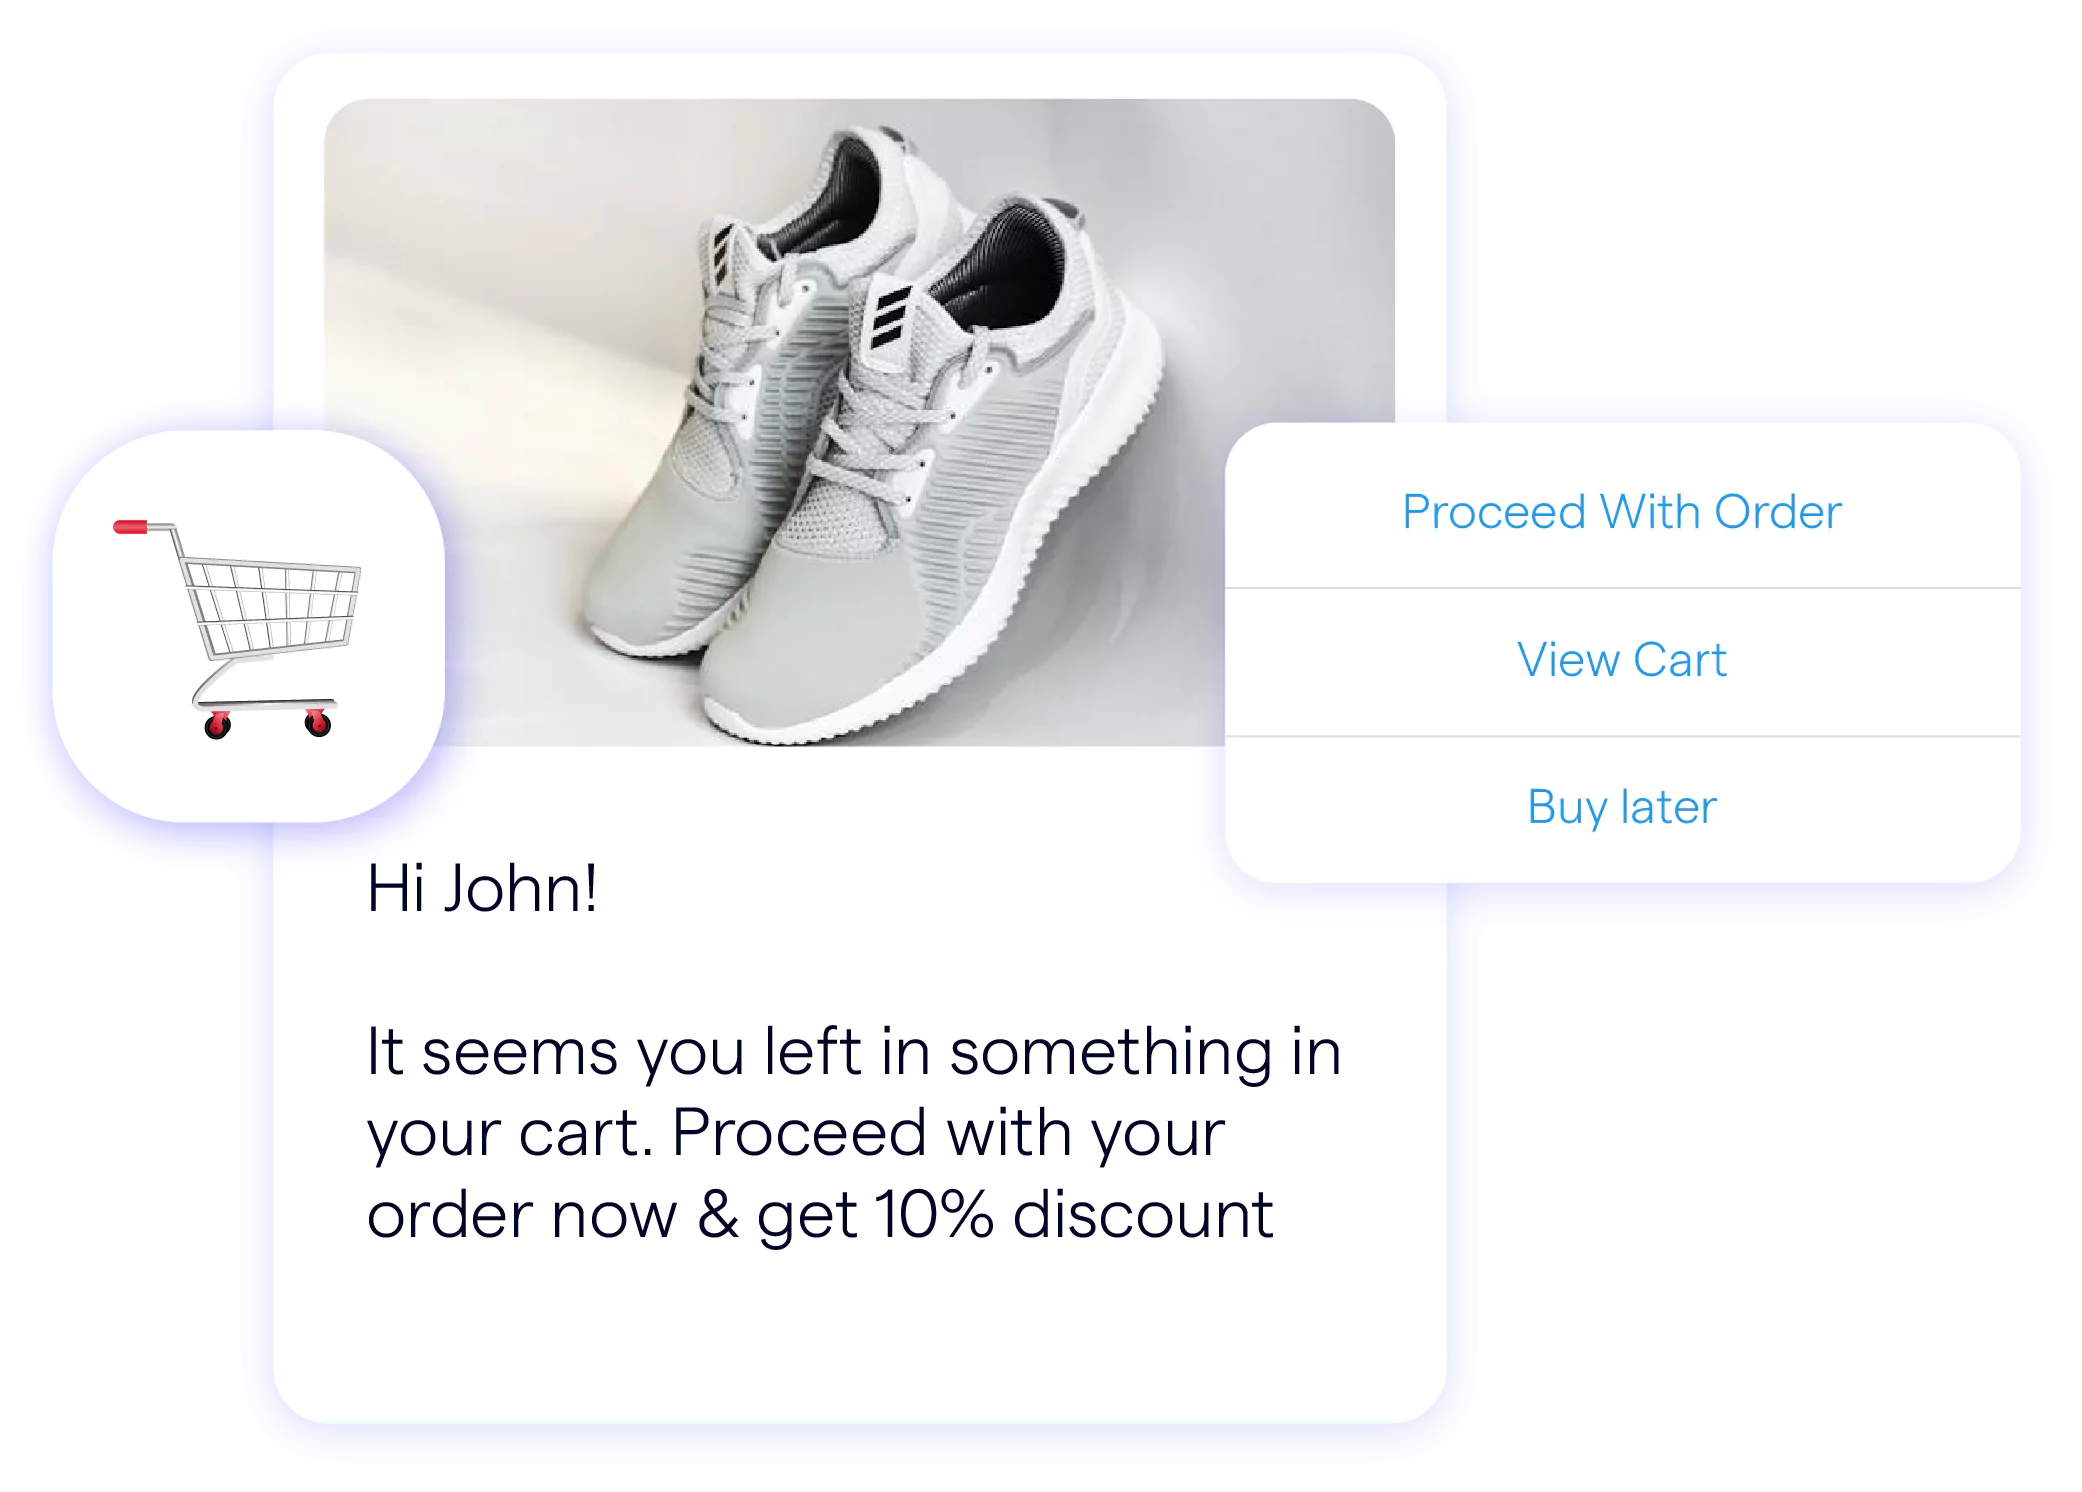 E-commerce Chatbot Use Cases